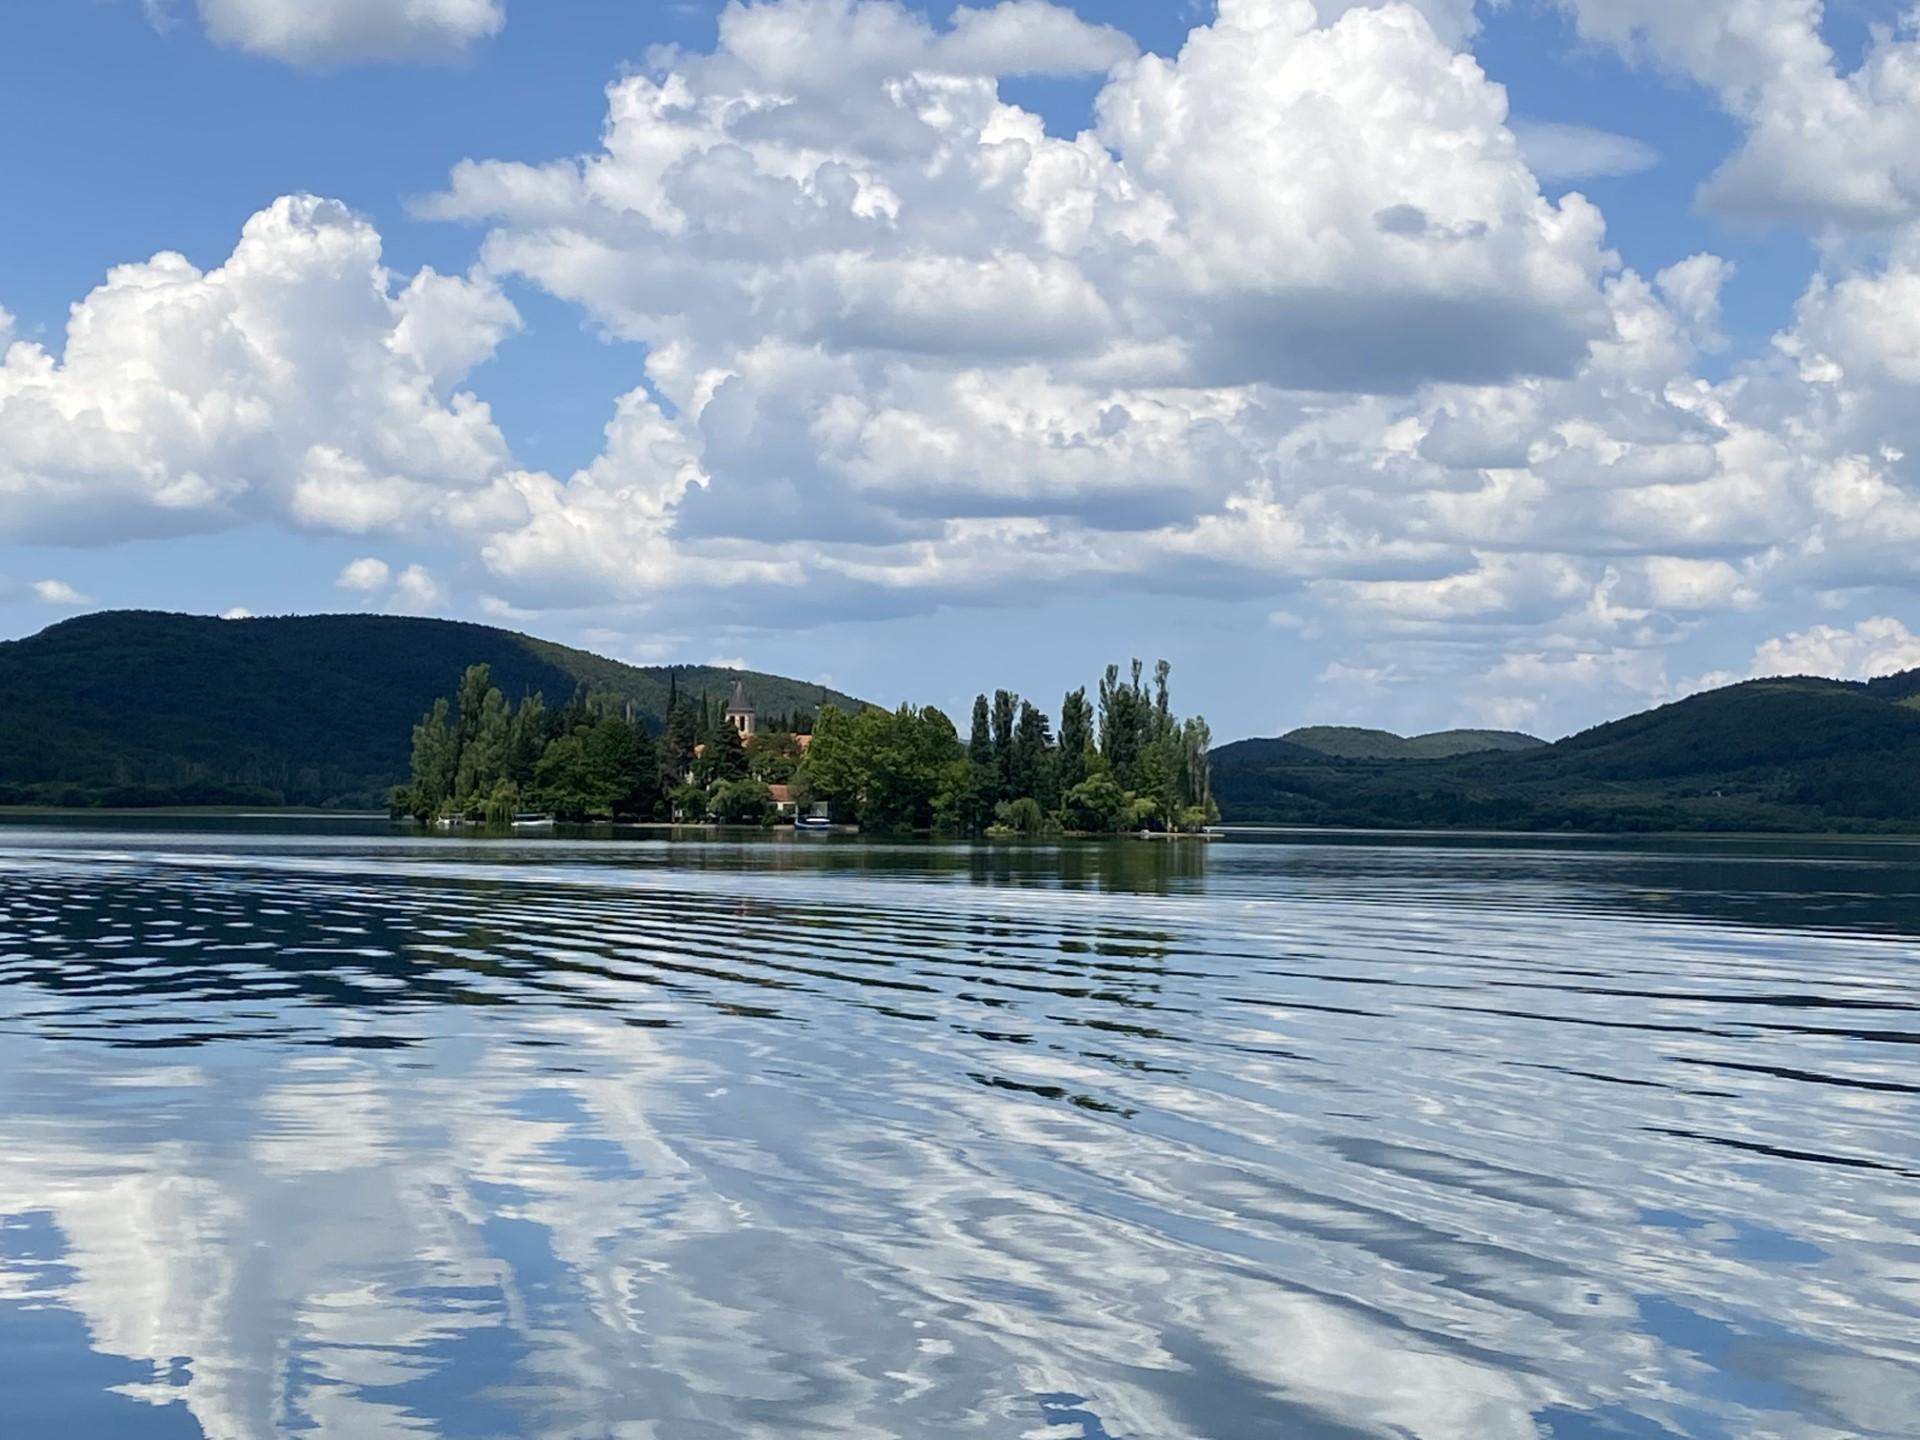 Bill Evans III: This picture was taken on a beautiful day from our ferry ride to the island of Visovac. The island features a still-functioning monastery and is owned by the Catholic Church. The island is situated between waterfalls in Krka National Park, Croatia.